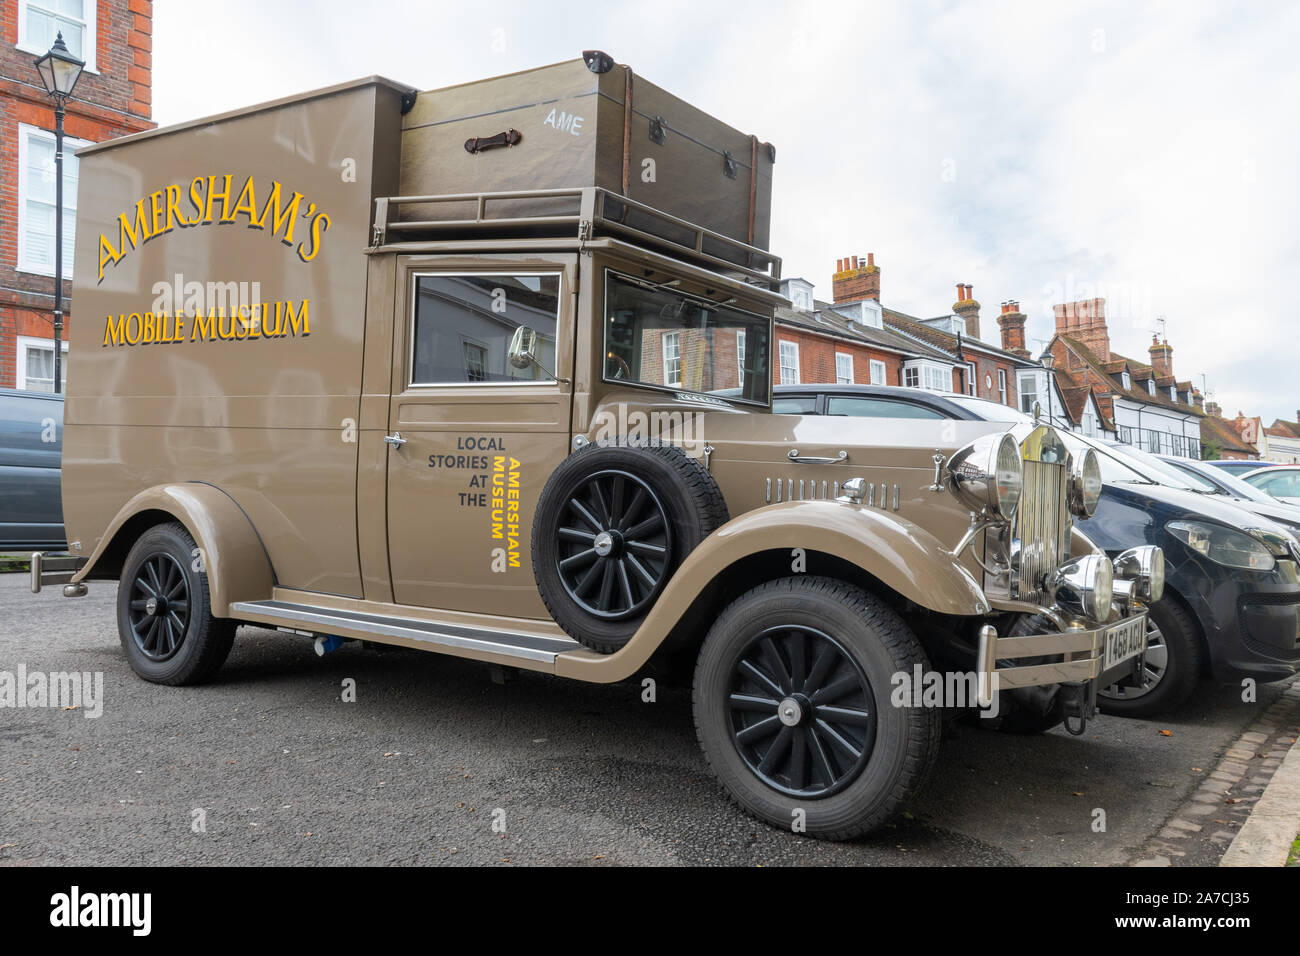 Amersham Mobile Museum vehicle, manufactured by London Taxis International Carbodies, on the high street in Amersham Old Town, Buckinghamshire, UK Stock Photo